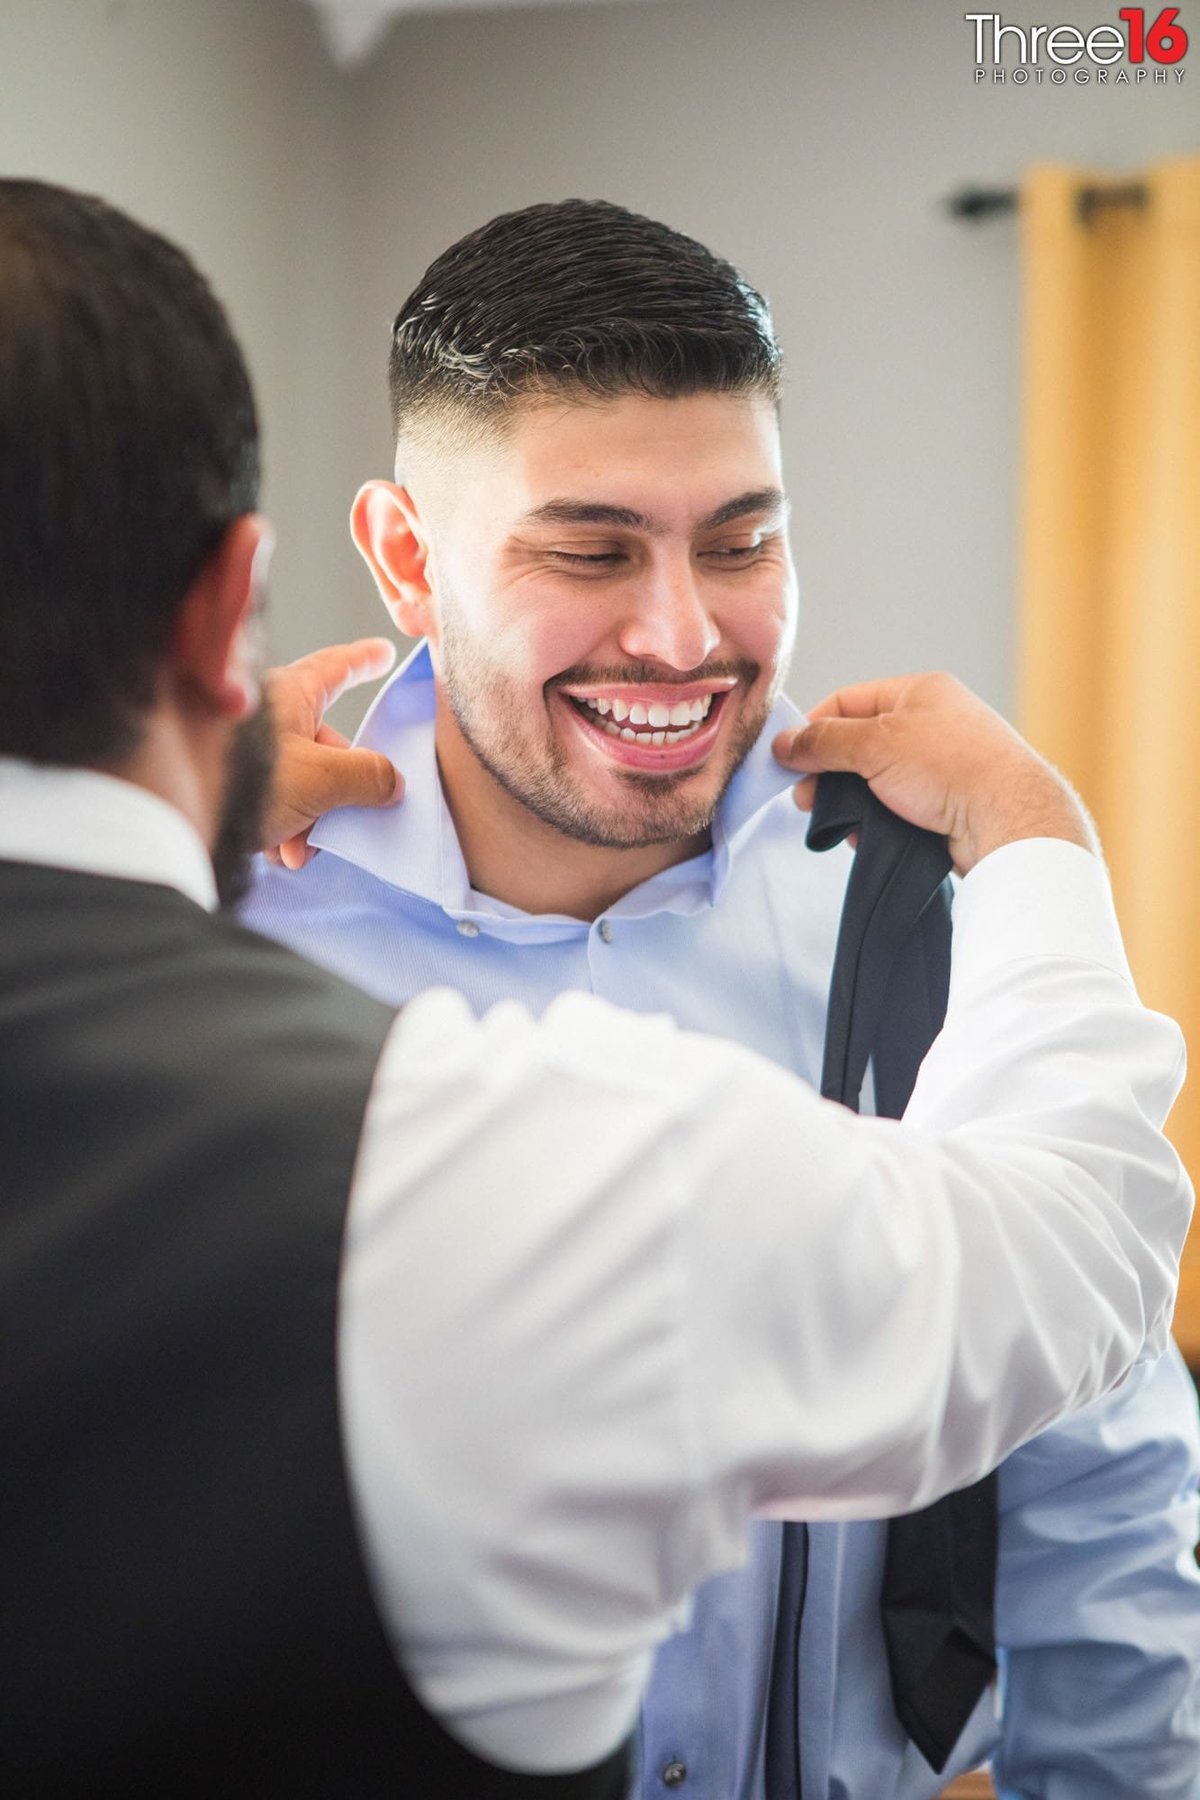 Groom getting help with his tie while getting ready for the wedding